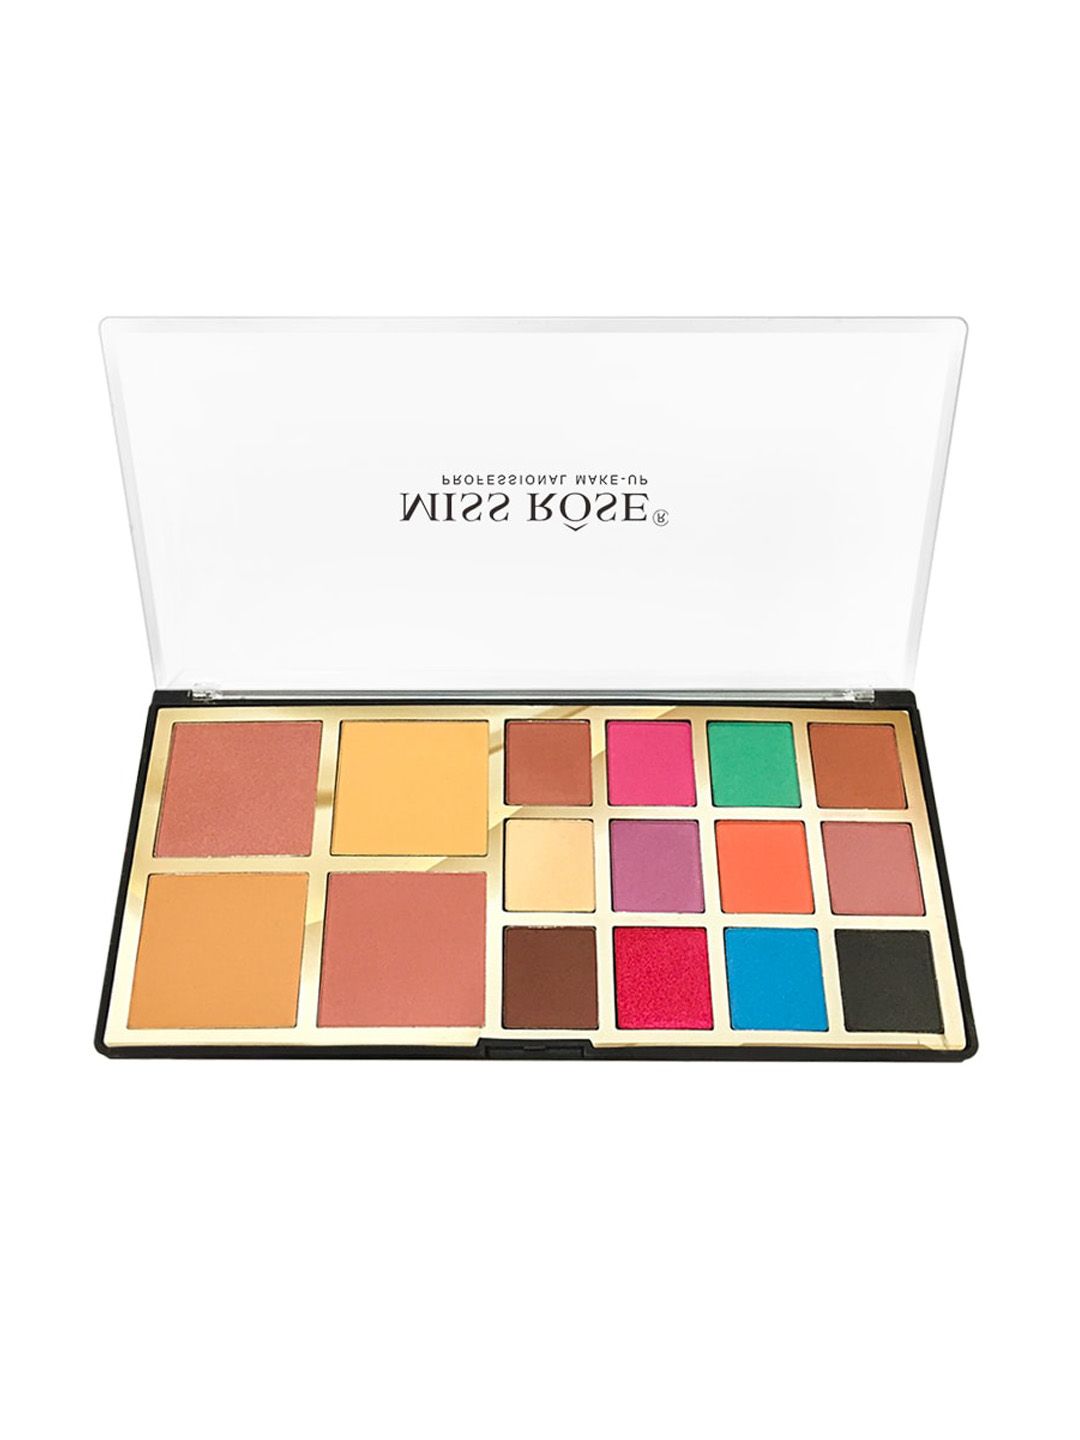 MISS ROSE Professional Makeup Kit Including 12 Color Eyeshadow 2 Compact & 2 Blush - 30 g Price in India